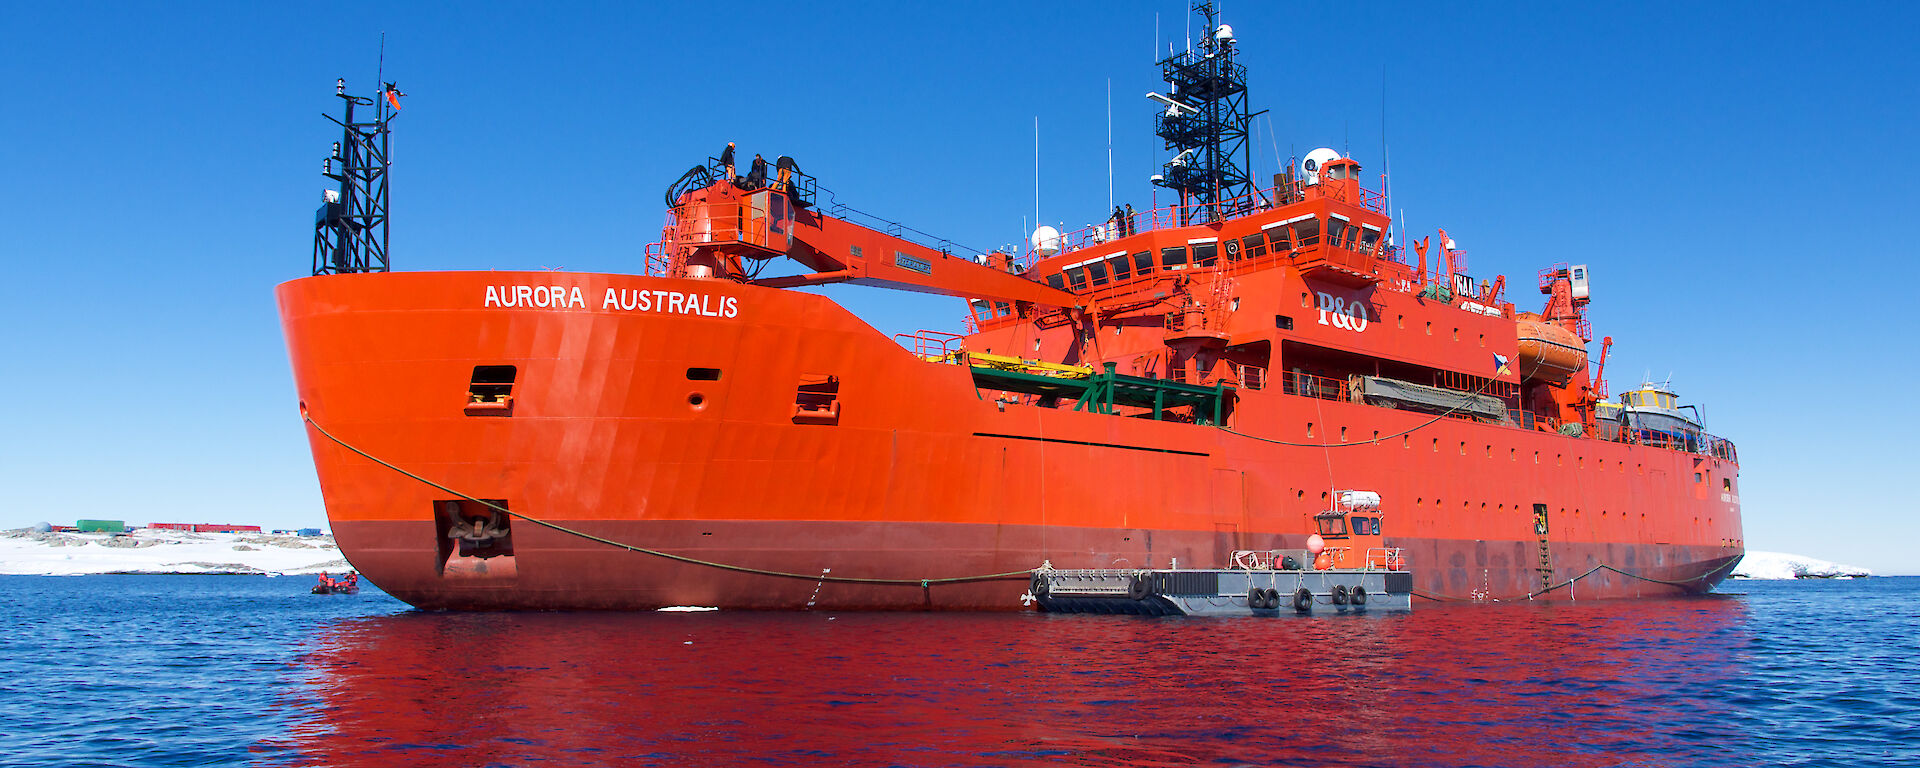 Scientists on board Australia’s icebreaker Aurora Australis will collect krill from the Southern Ocean